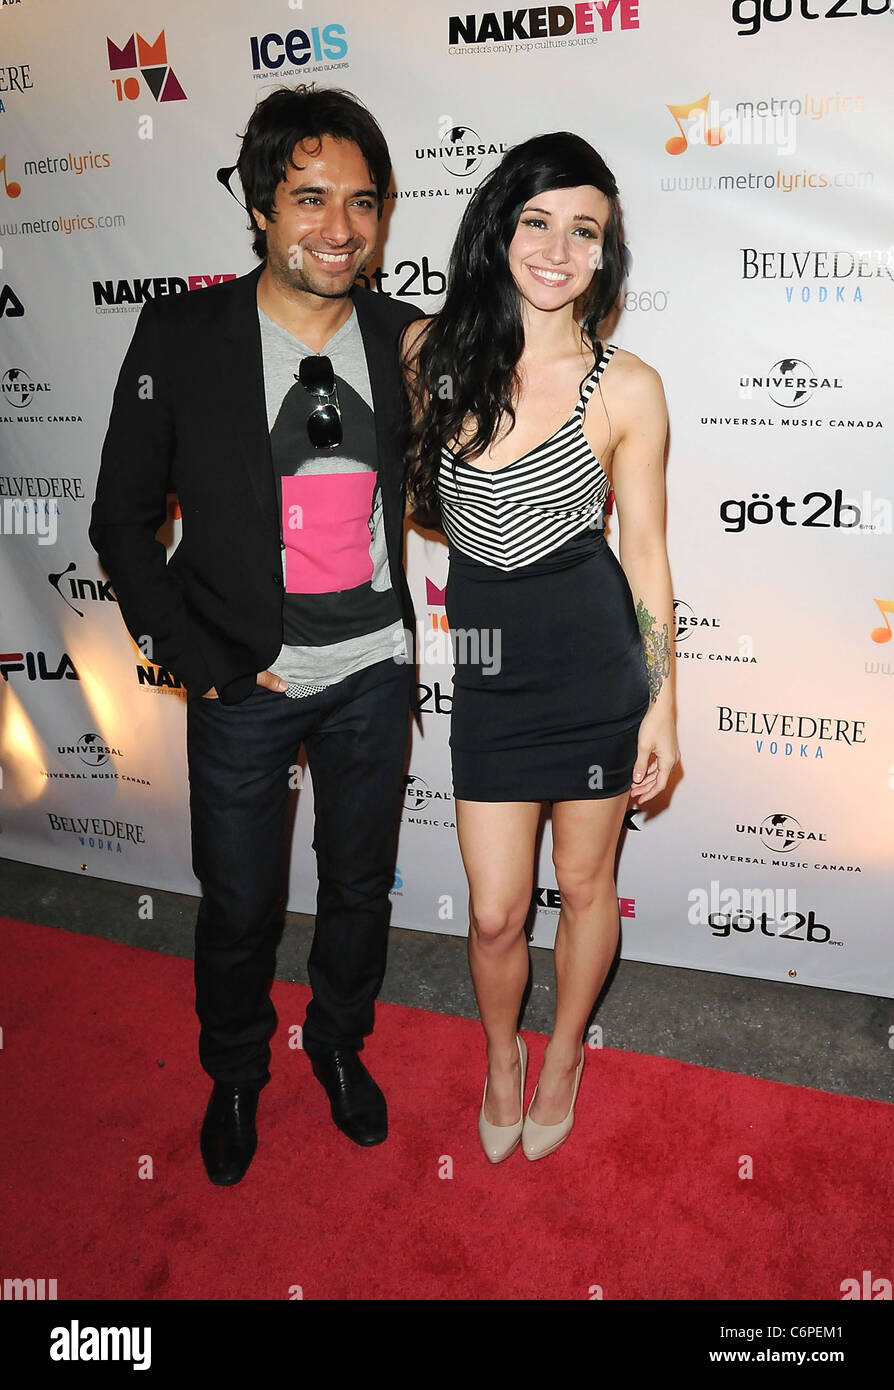 Jian Ghomeshi and Lights 2010 MuchMusic Video Awards - Afterparty Arrivals Toronto, Canada - 20.06.10 I.Kavanaugh Stock Photo